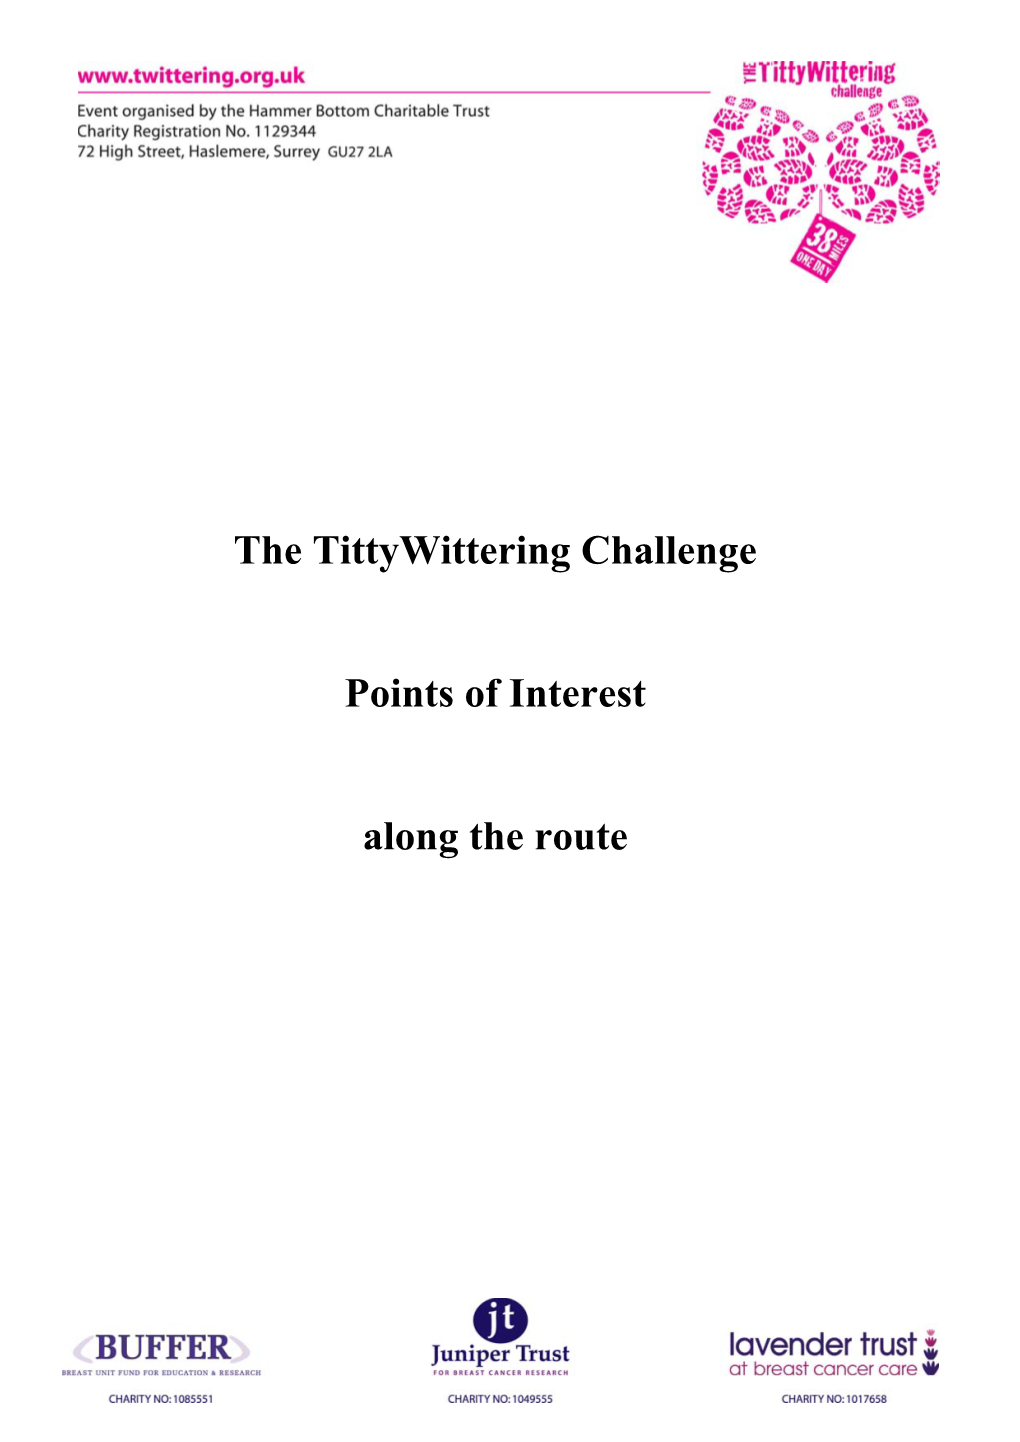 The Tittywittering Challenge Points of Interest Along the Route